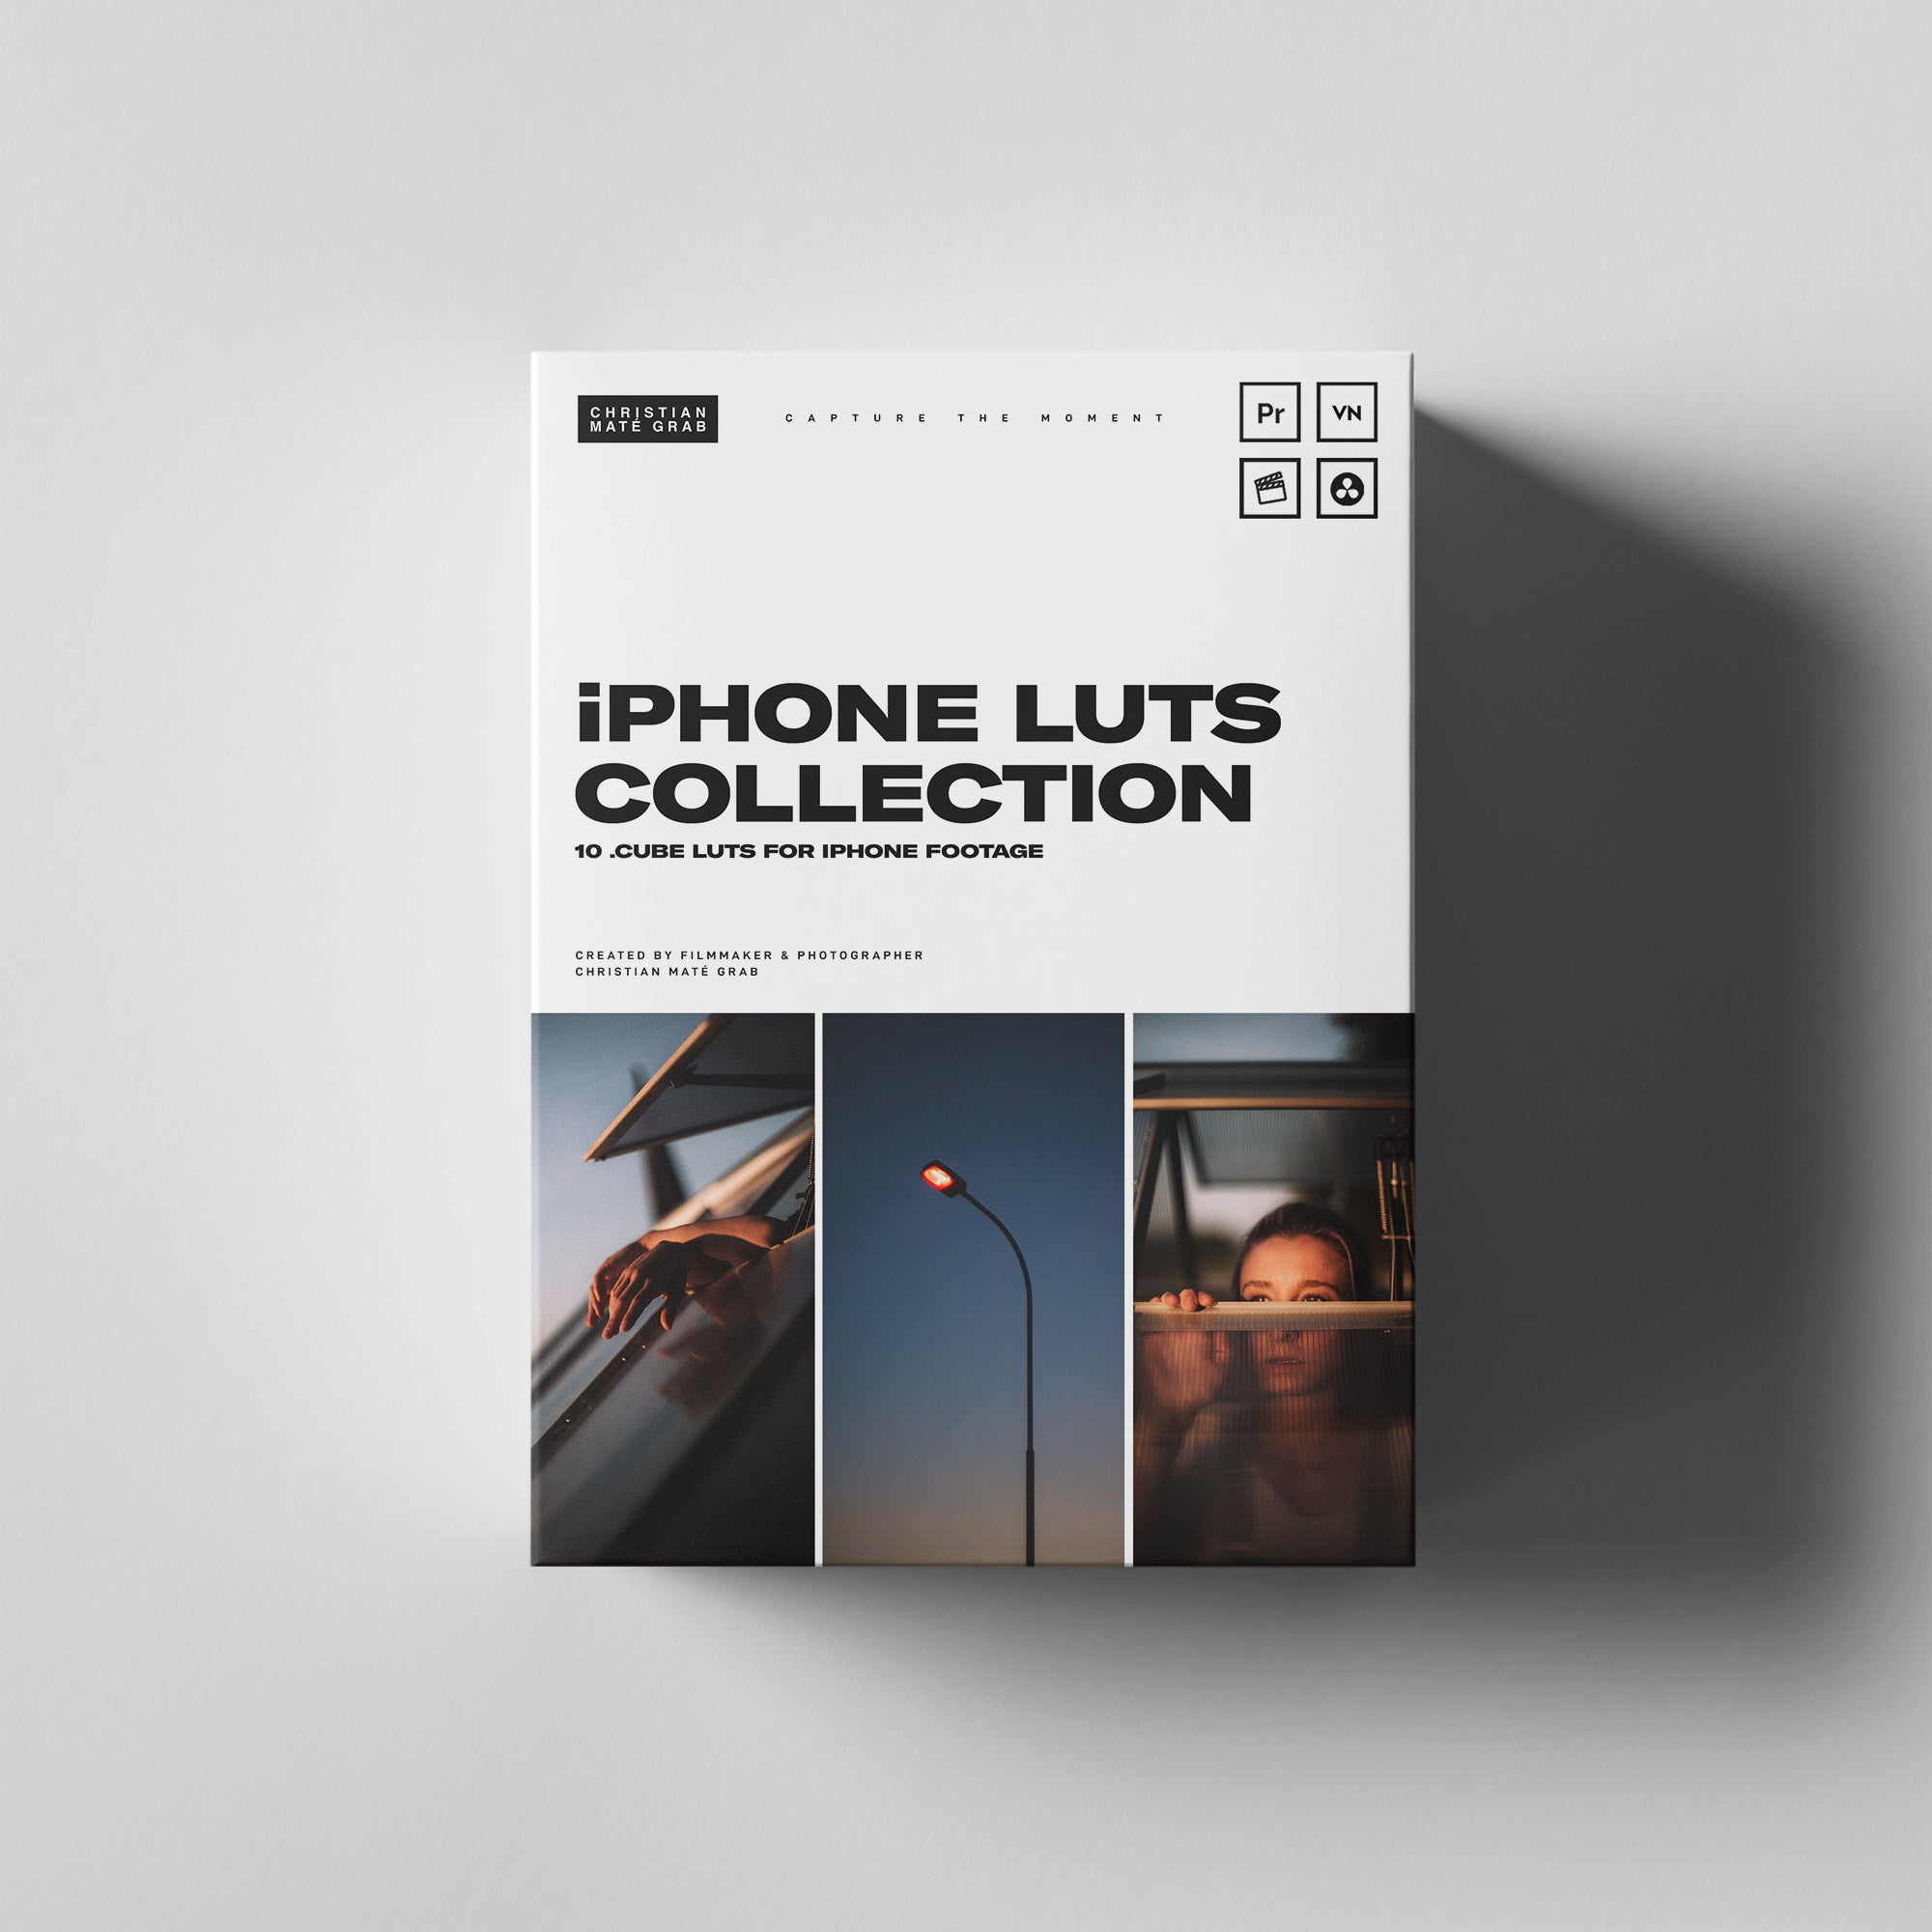 iPhone LUTs Collection